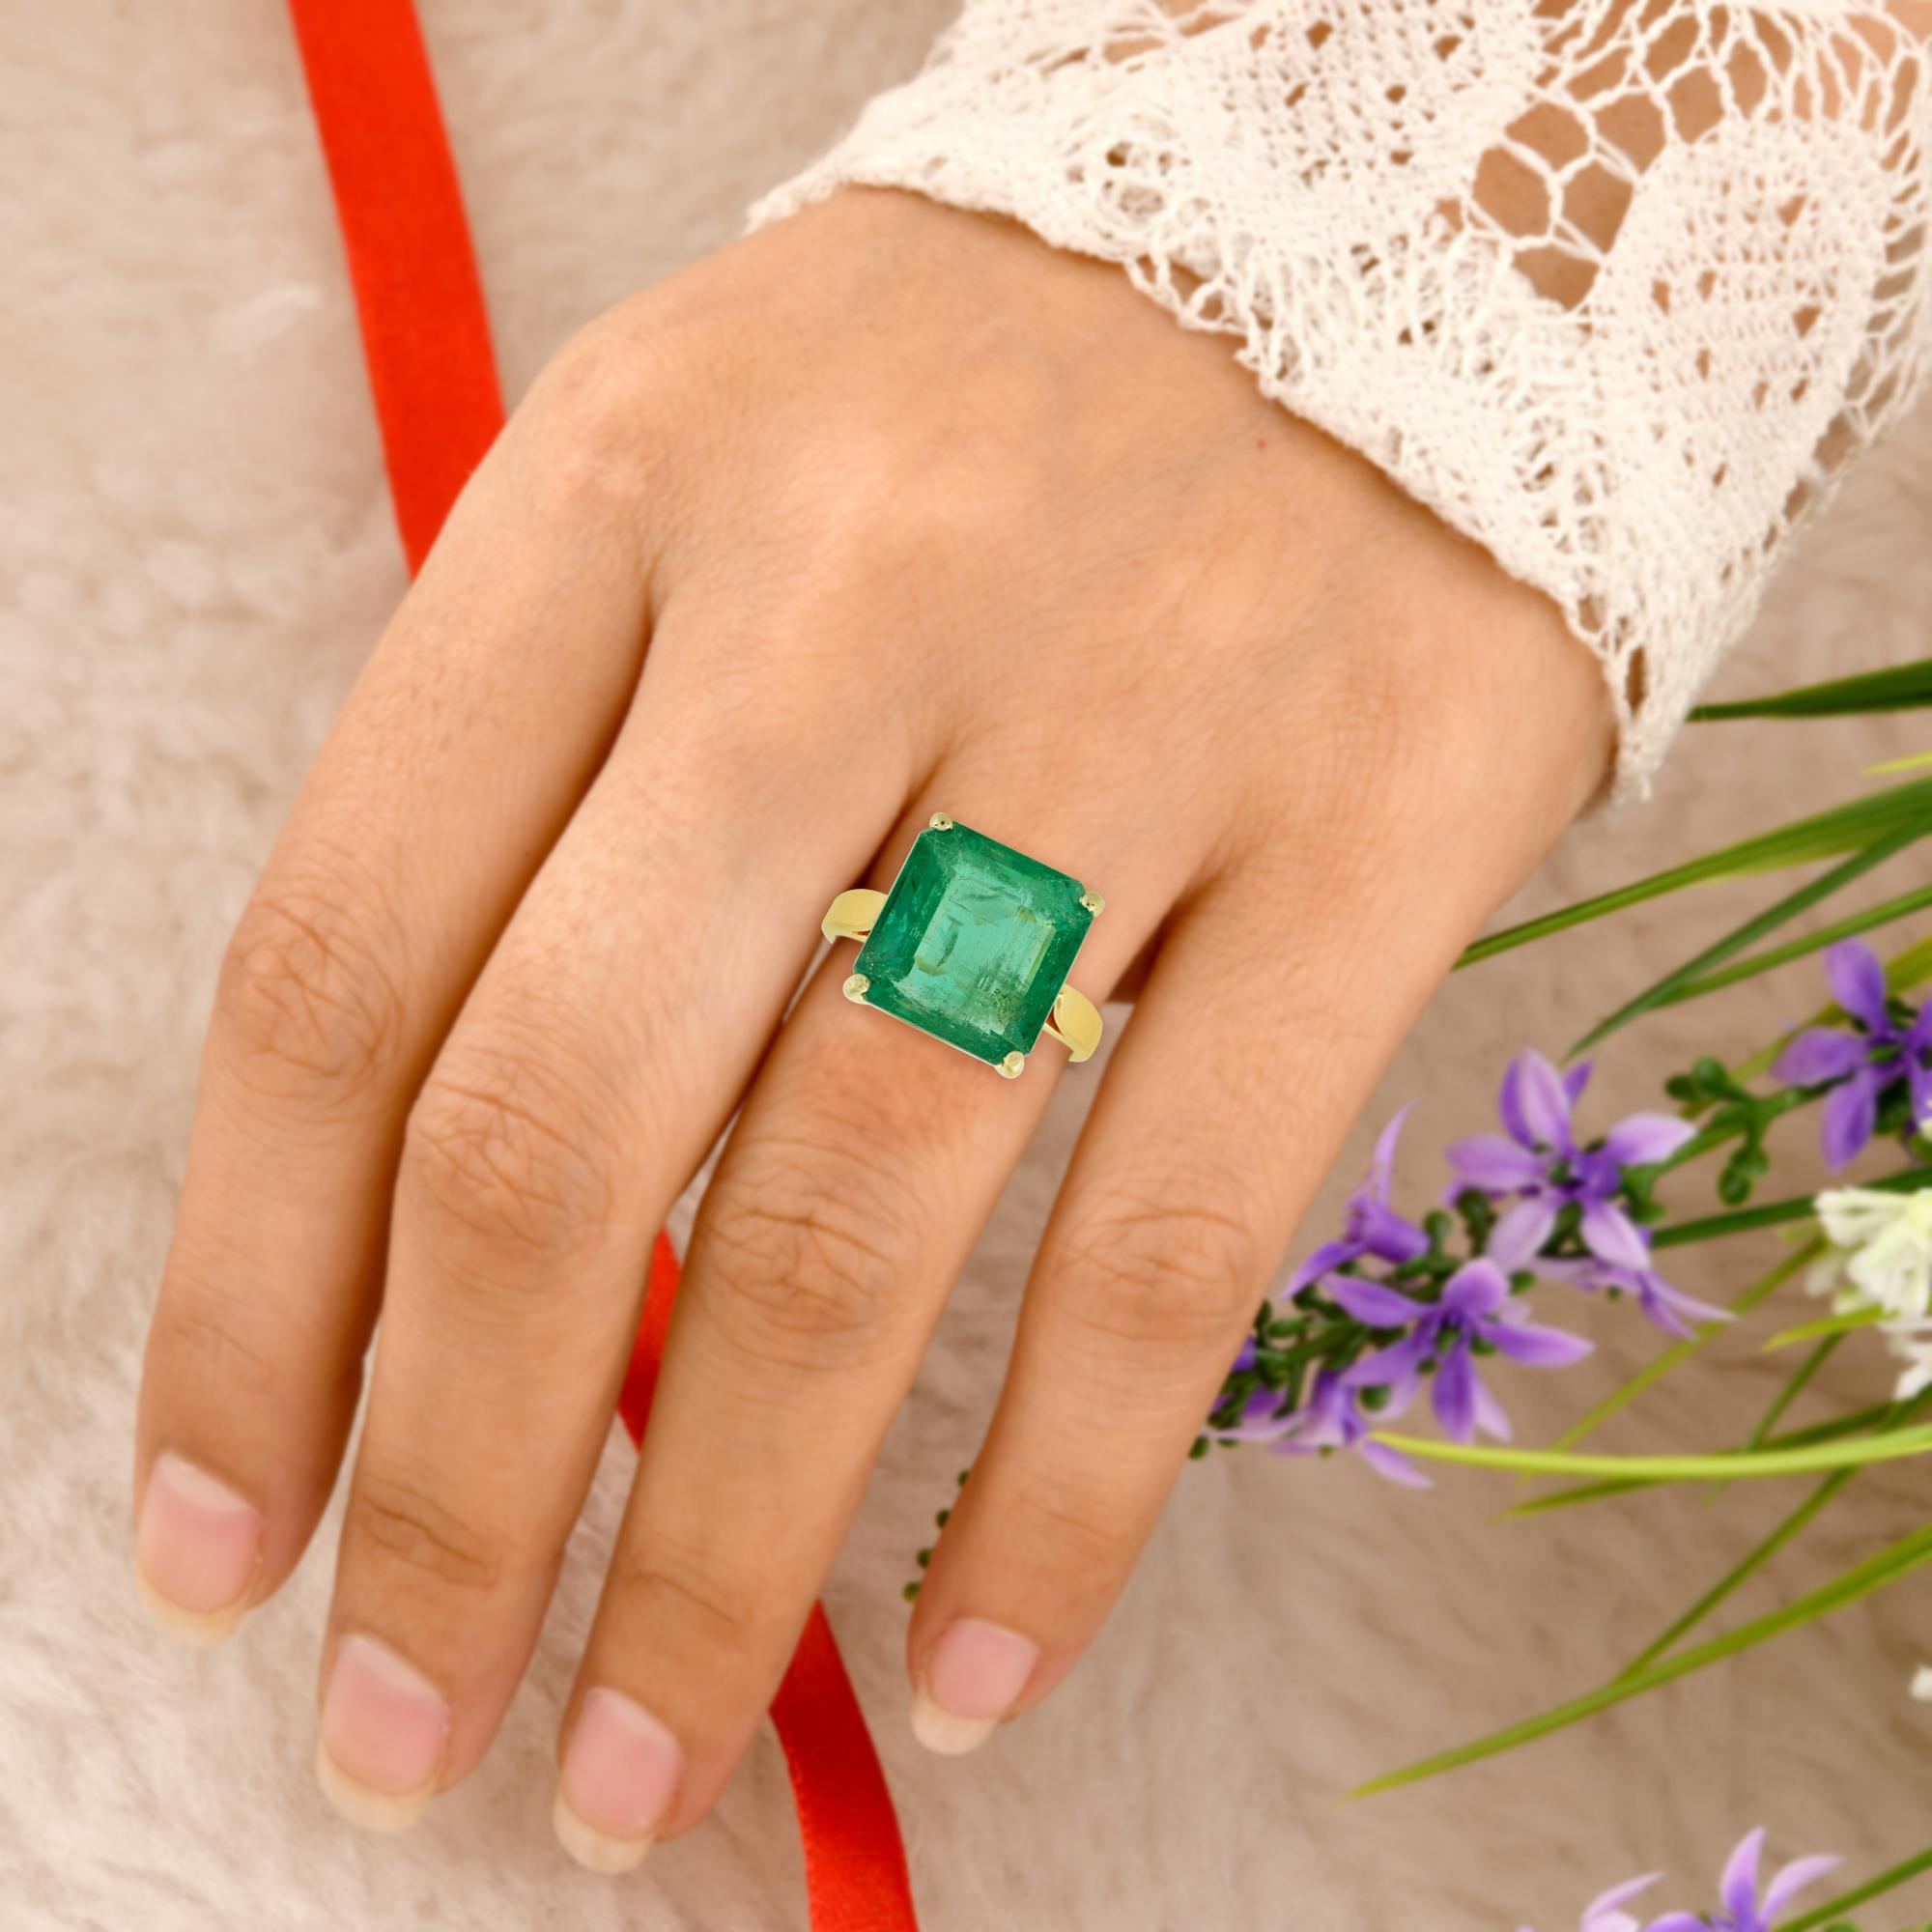 Women's Natural 5.84 Carat Solitaire Emerald Gemstone Ring 18k Yellow Gold Fine Jewelry